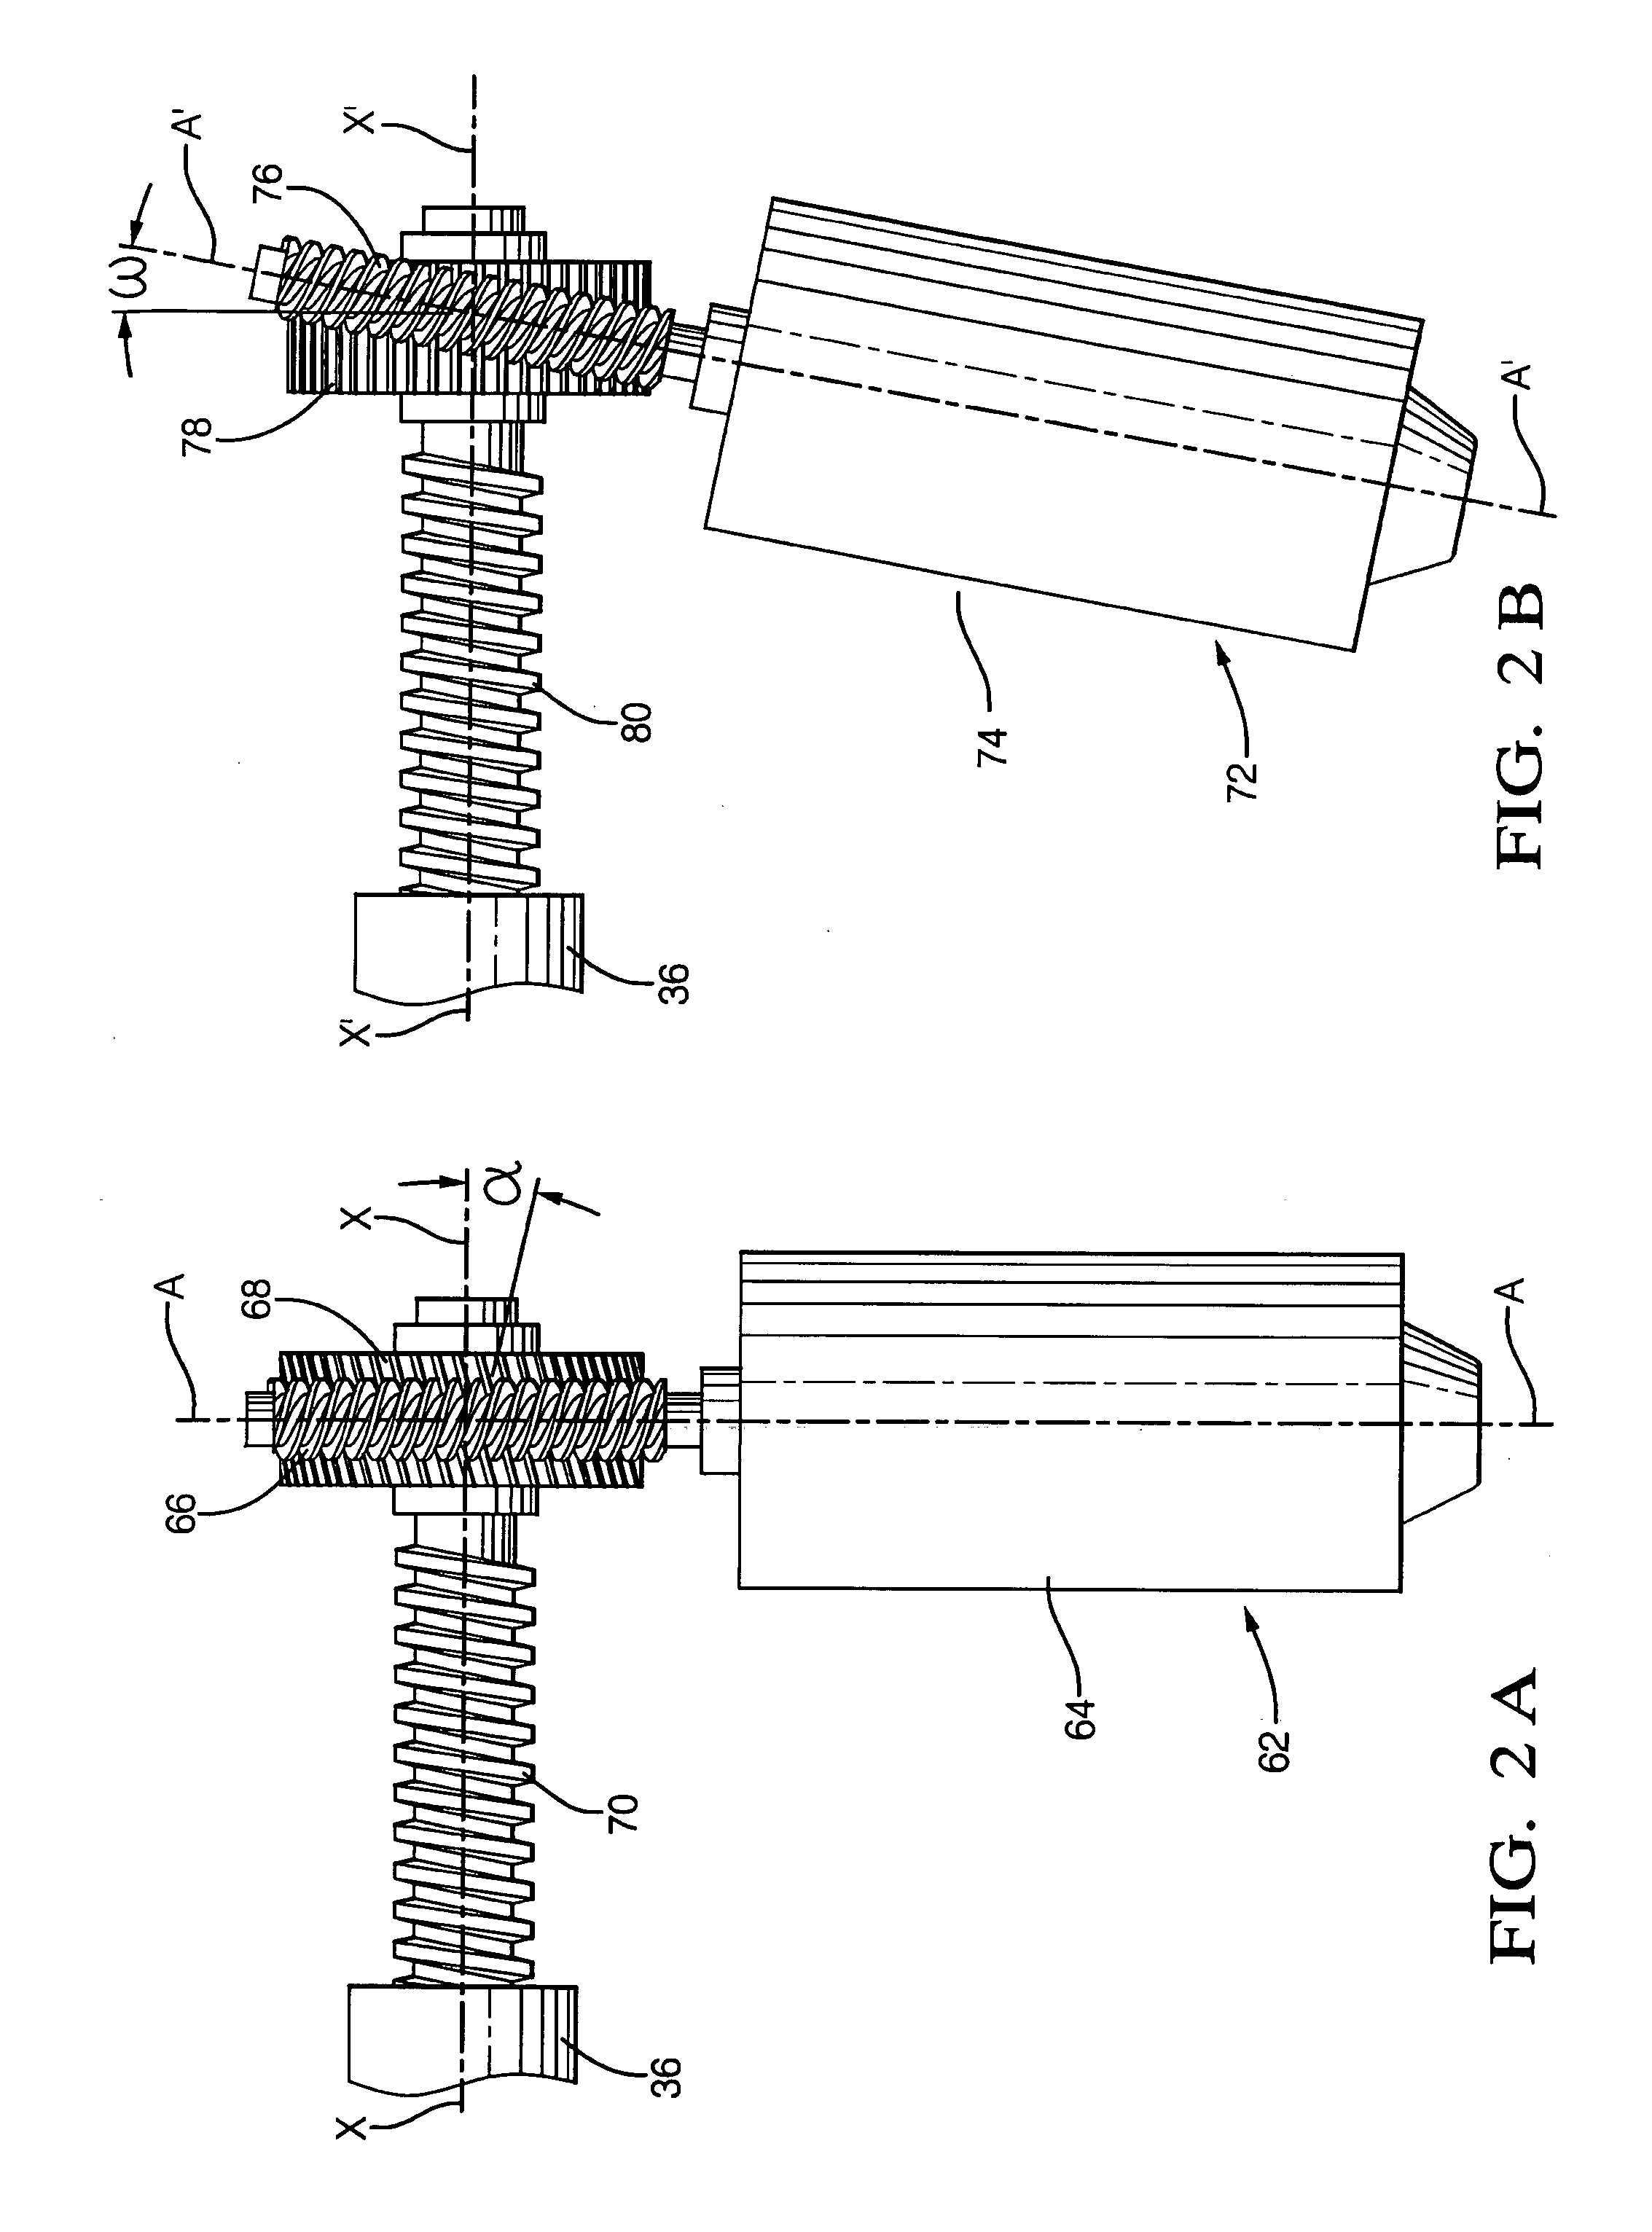 Linear drive actuator for a movable vehicle panel